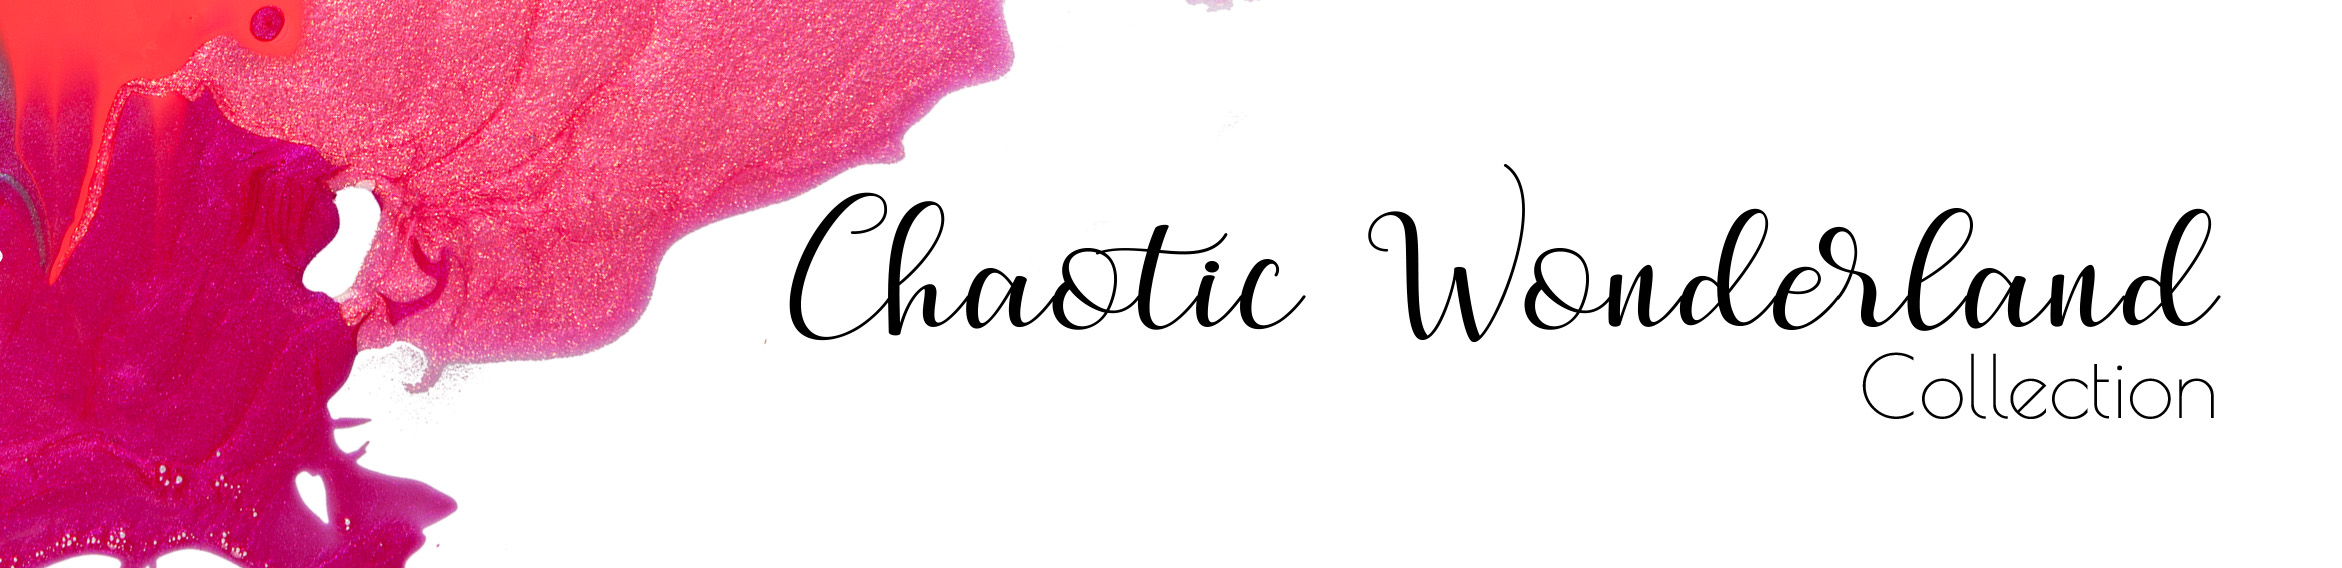 Chaotic_Wonderland_Collection